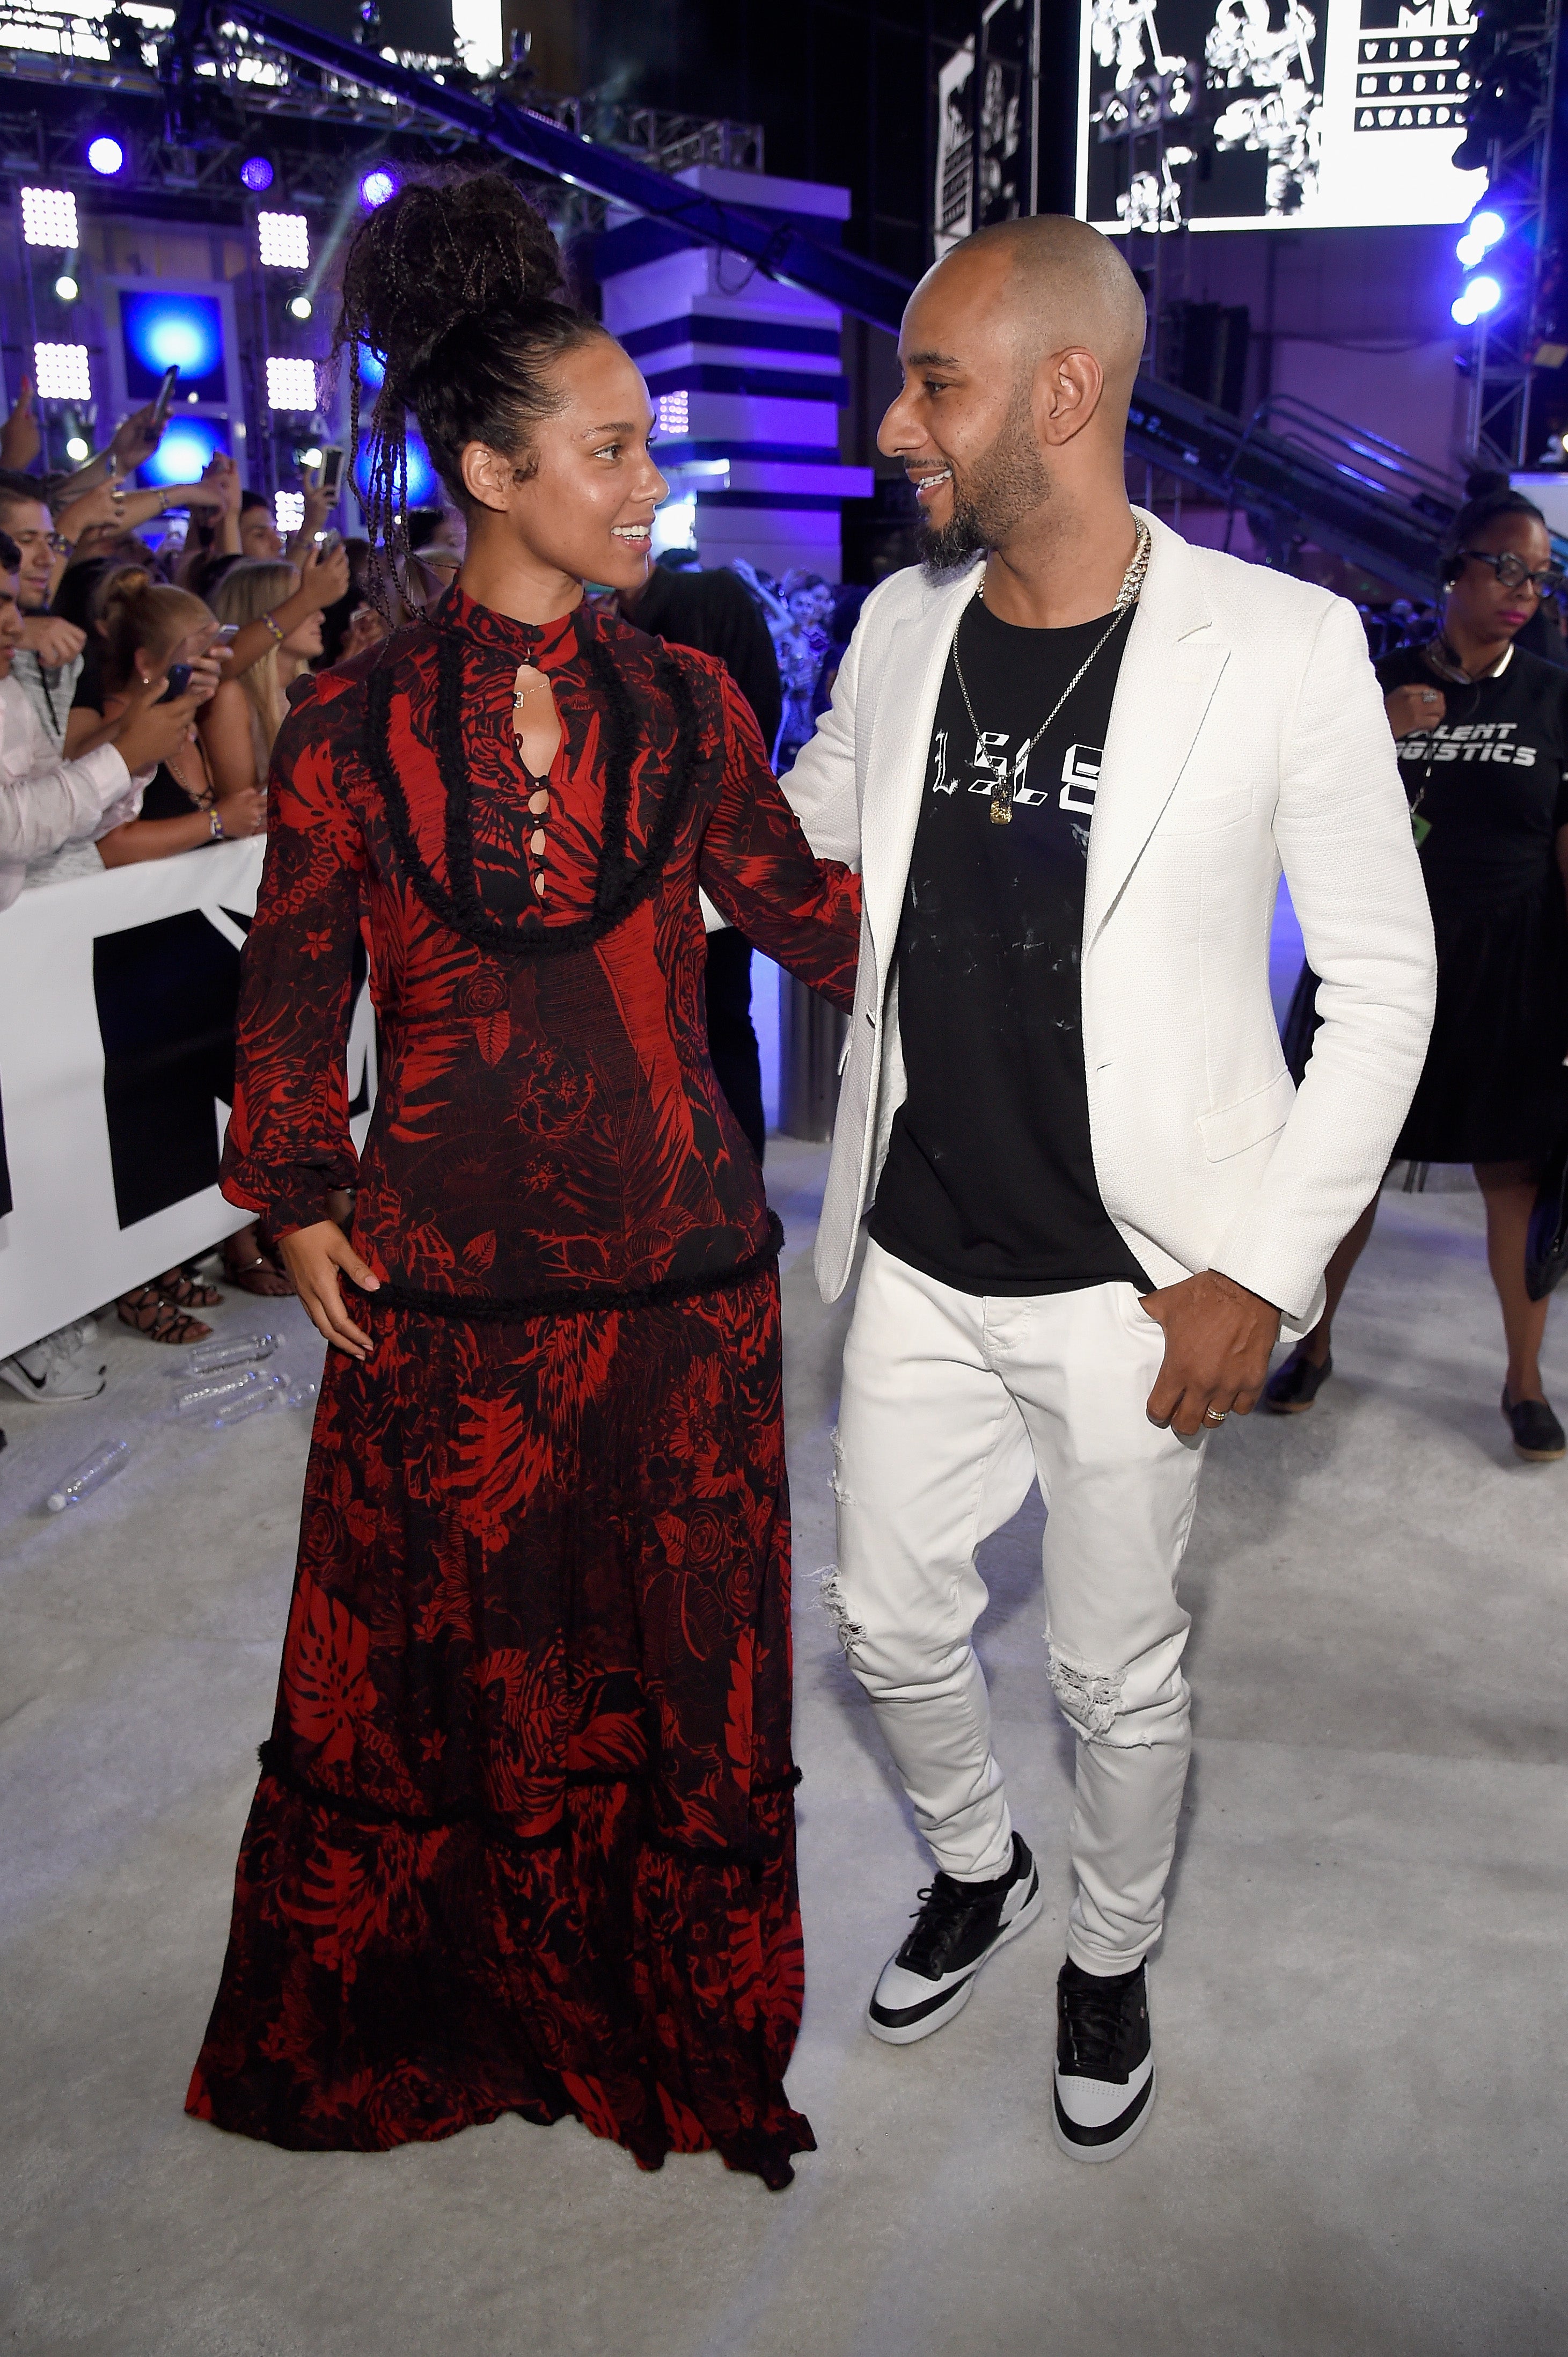 Swizz Beatz Defends Alicia Keys' Makeup Free Look, "Why Are You Mad?"
